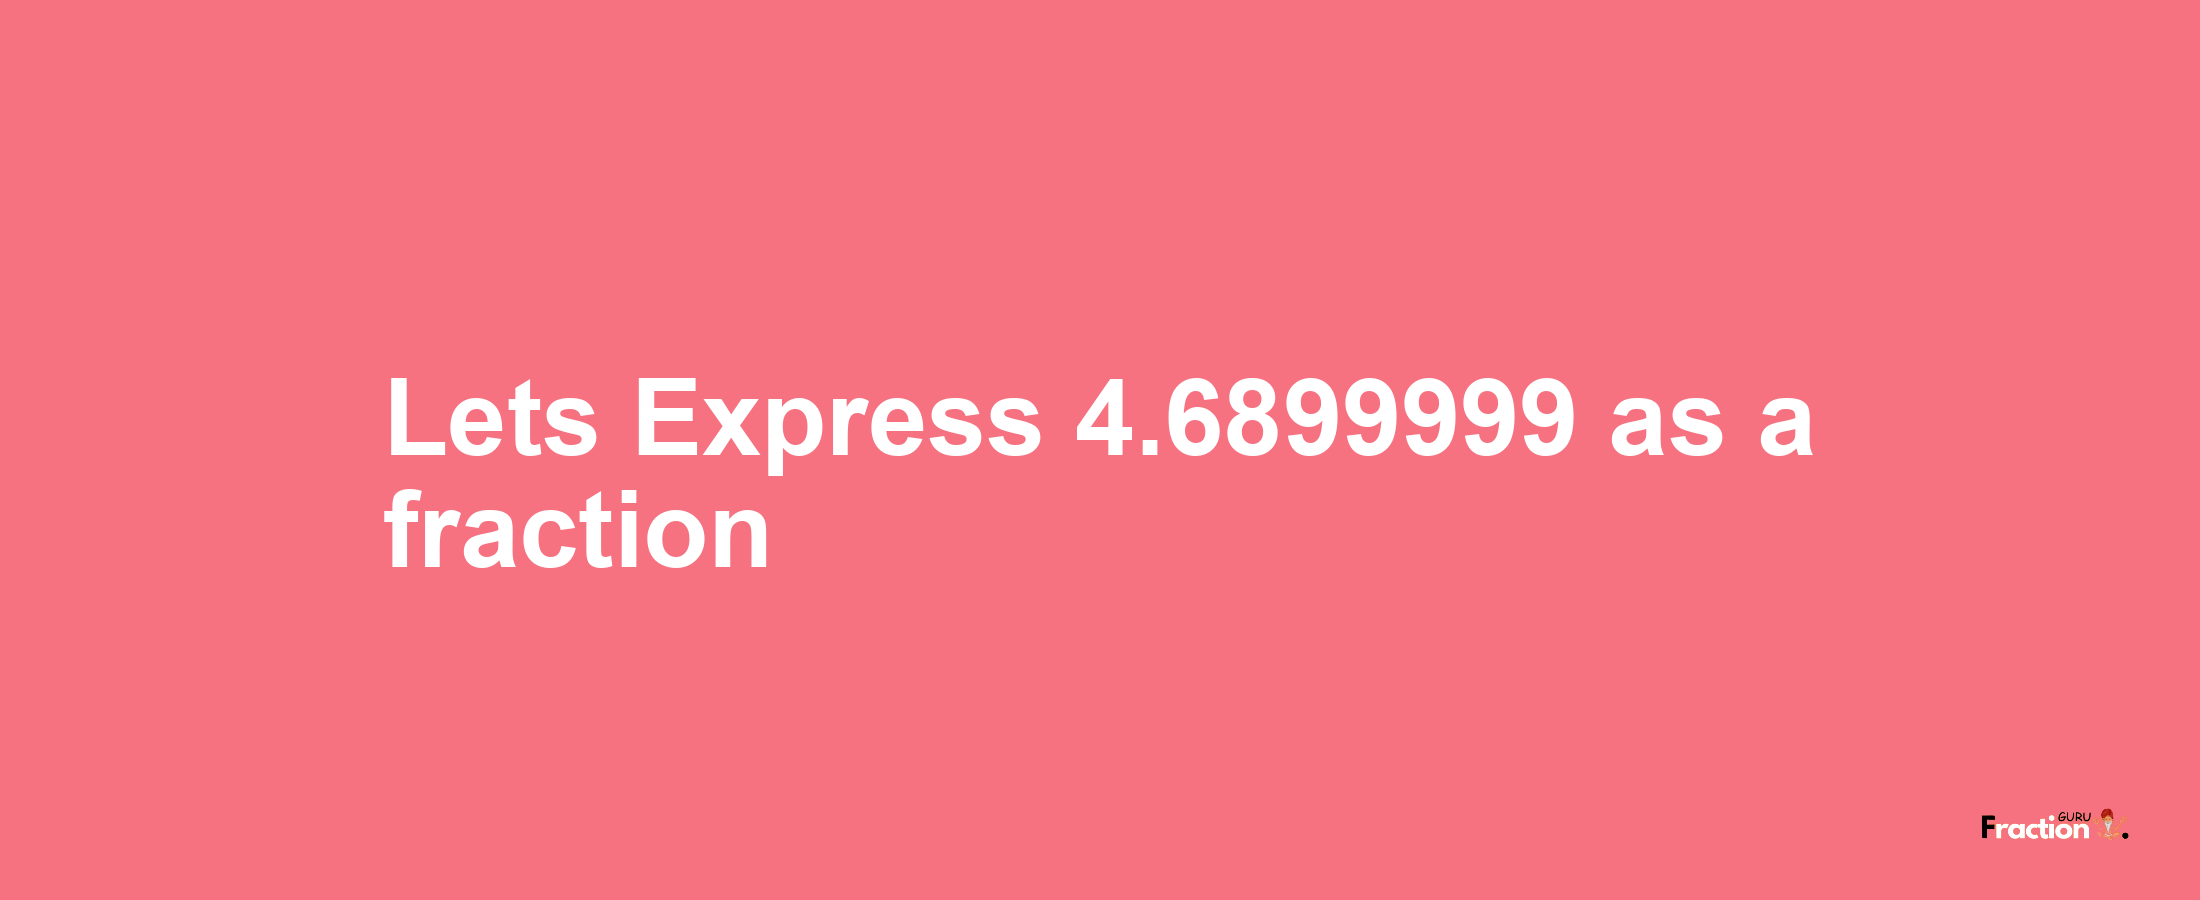 Lets Express 4.6899999 as afraction